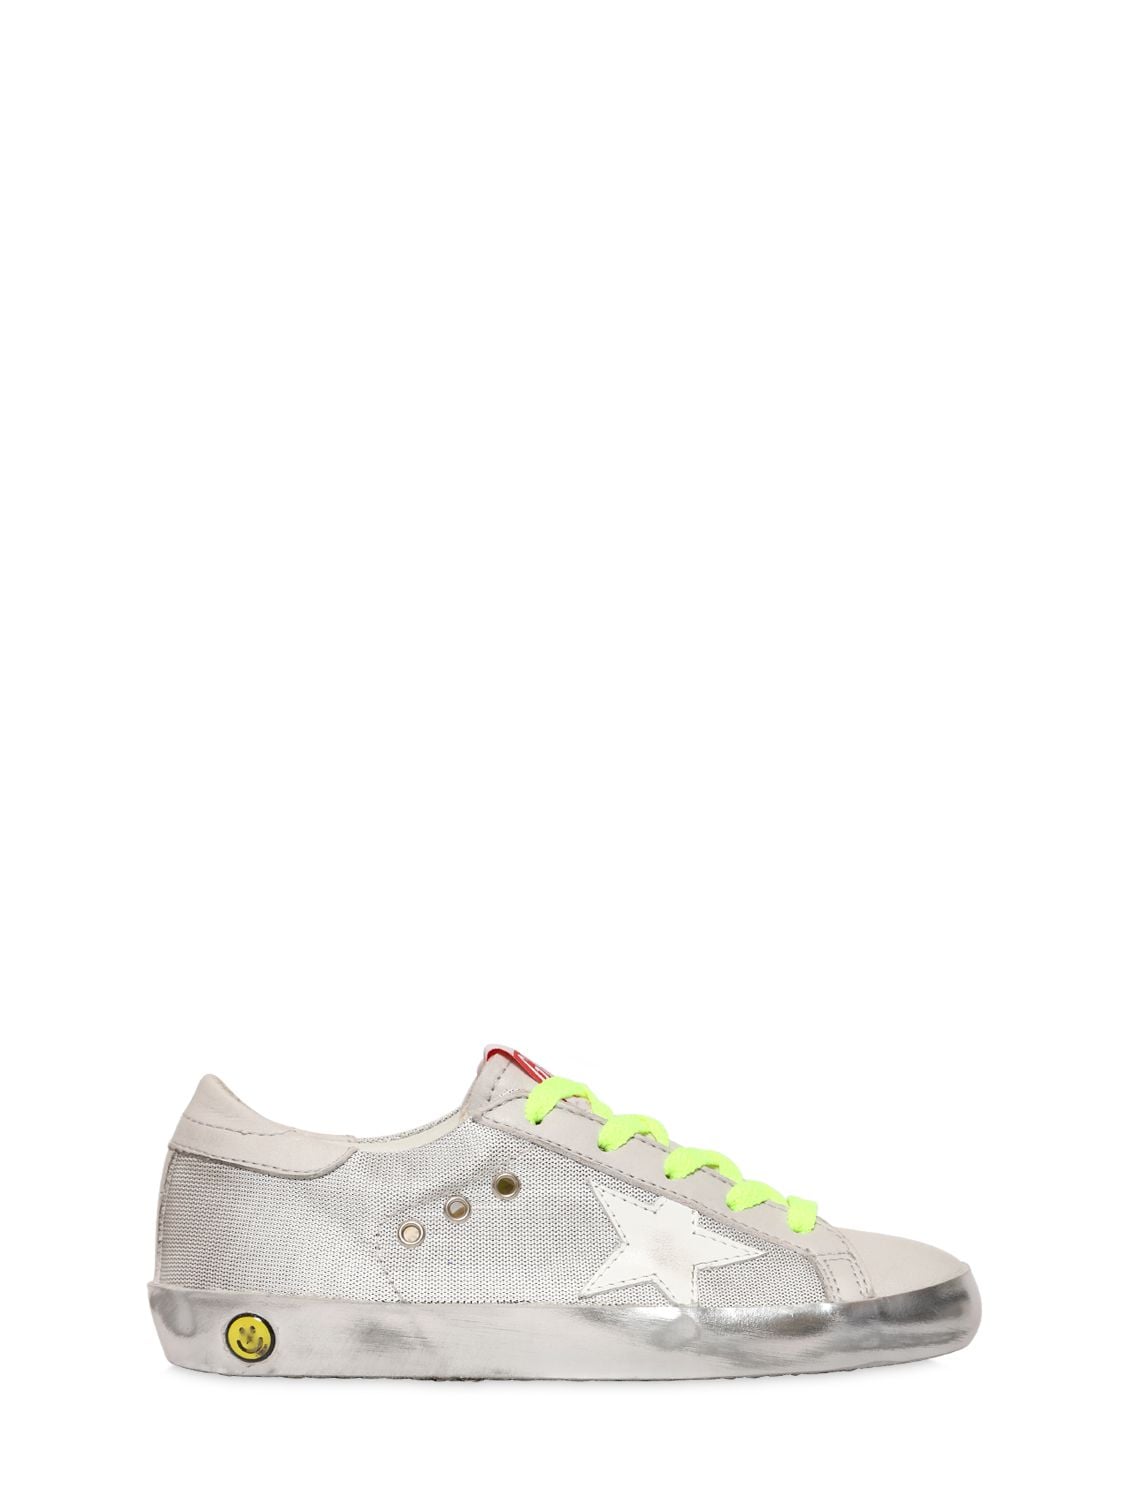 Golden Goose Kids' Super Star Canvas & Leather Sneakers In White